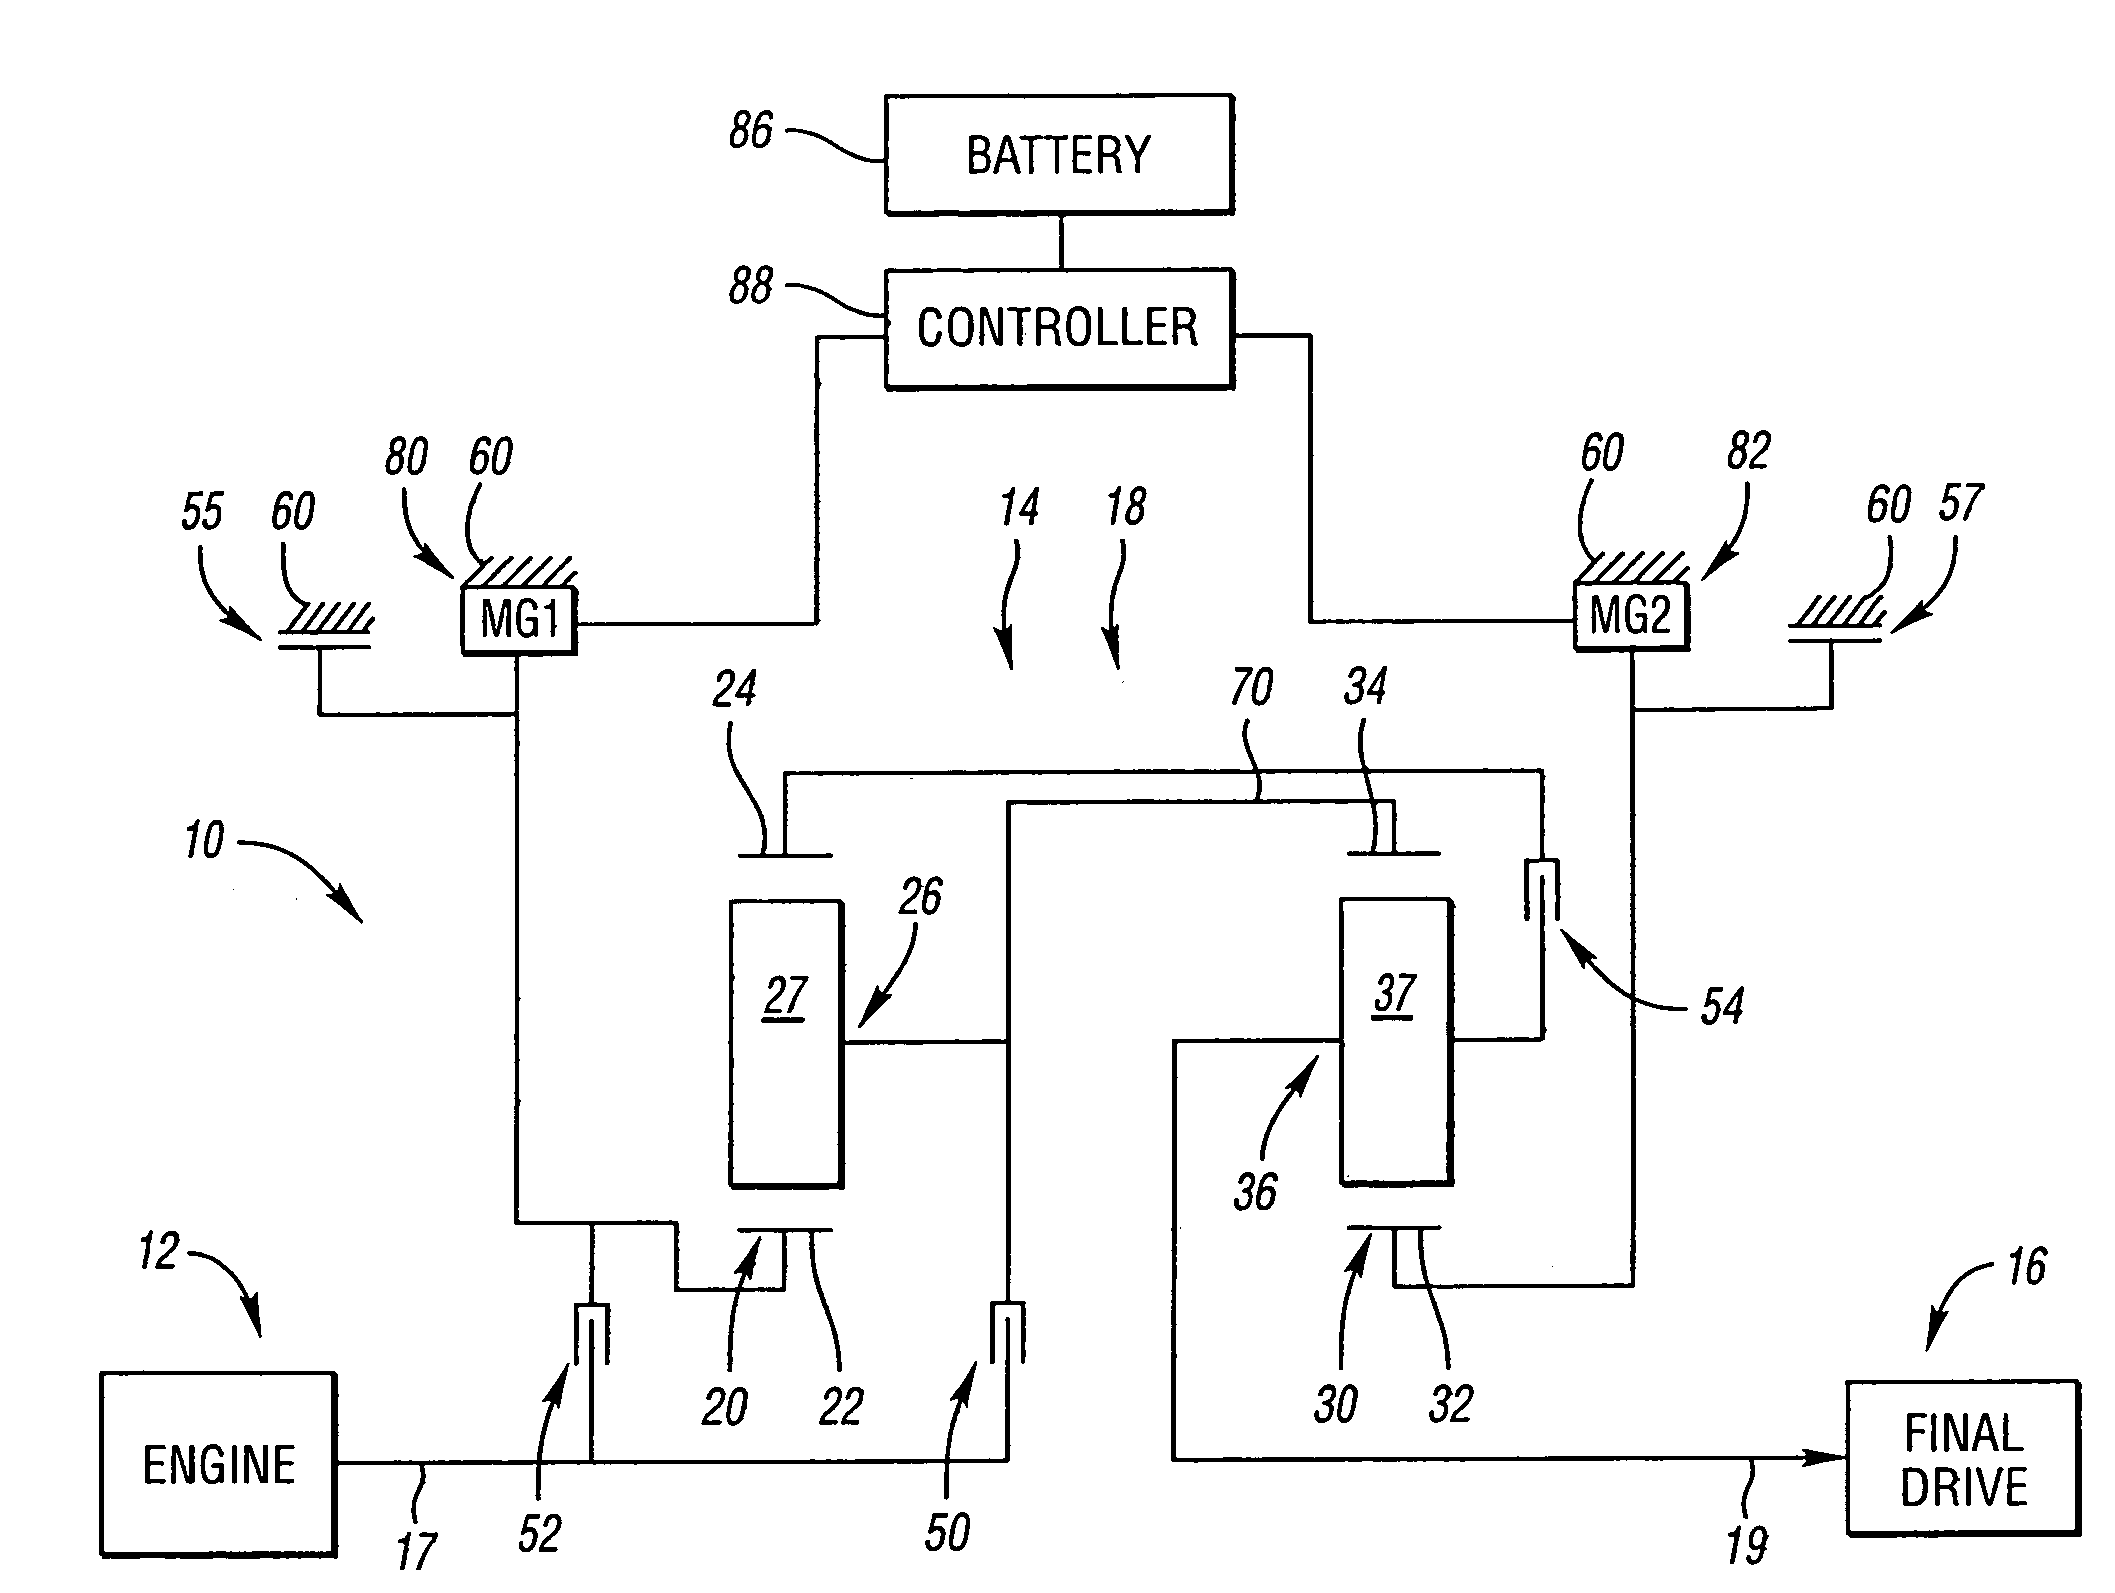 Electrically variable transmission having two planetary gear sets with one interconnecting member and clutched input